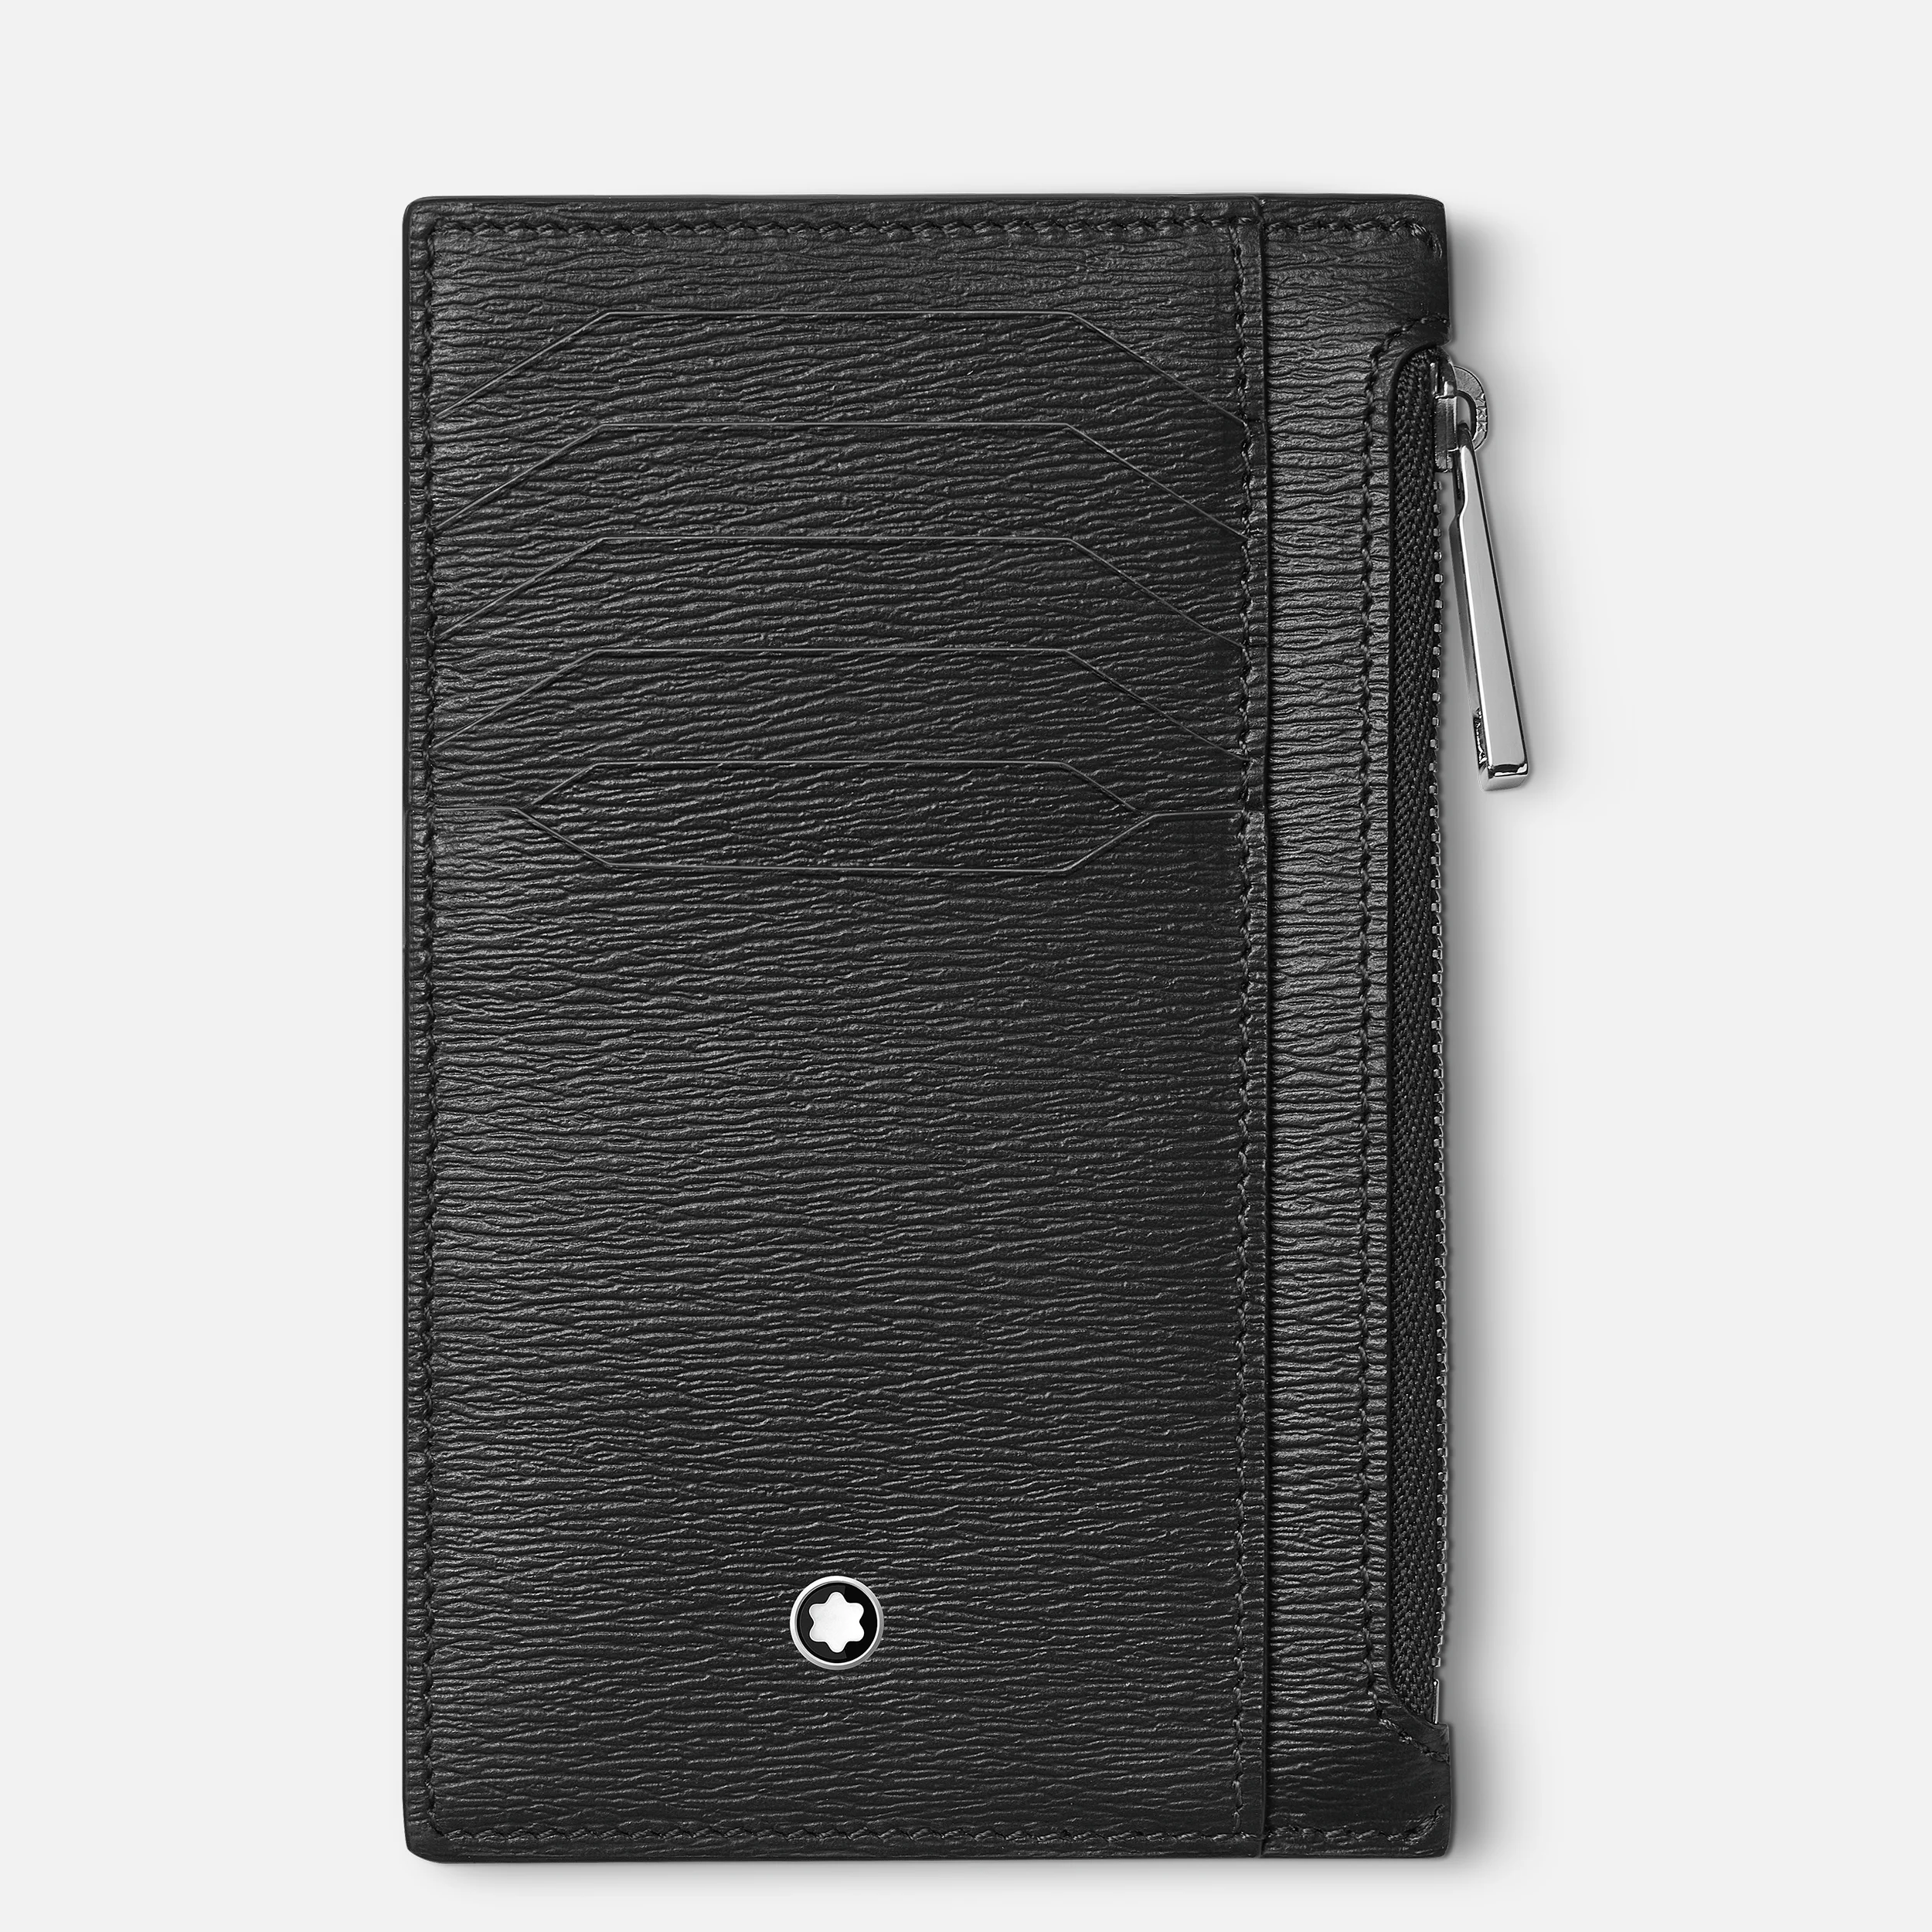 Montblanc Meisterstuck 4810 Pocket Holder 8cc with zipped pocket - Pencraft the boutique